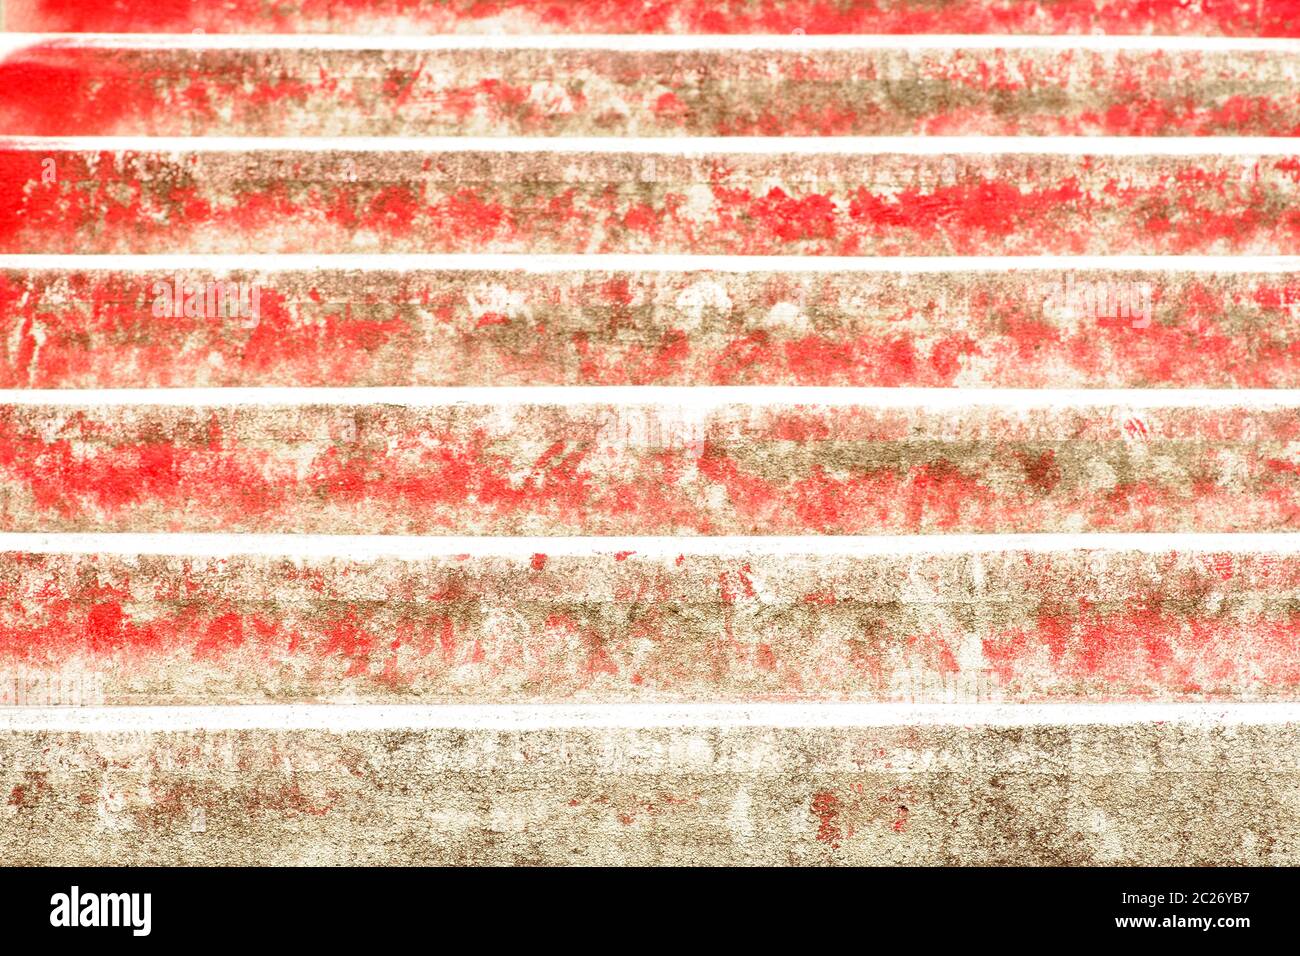 The close-up of the surface of red stairs. Stock Photo